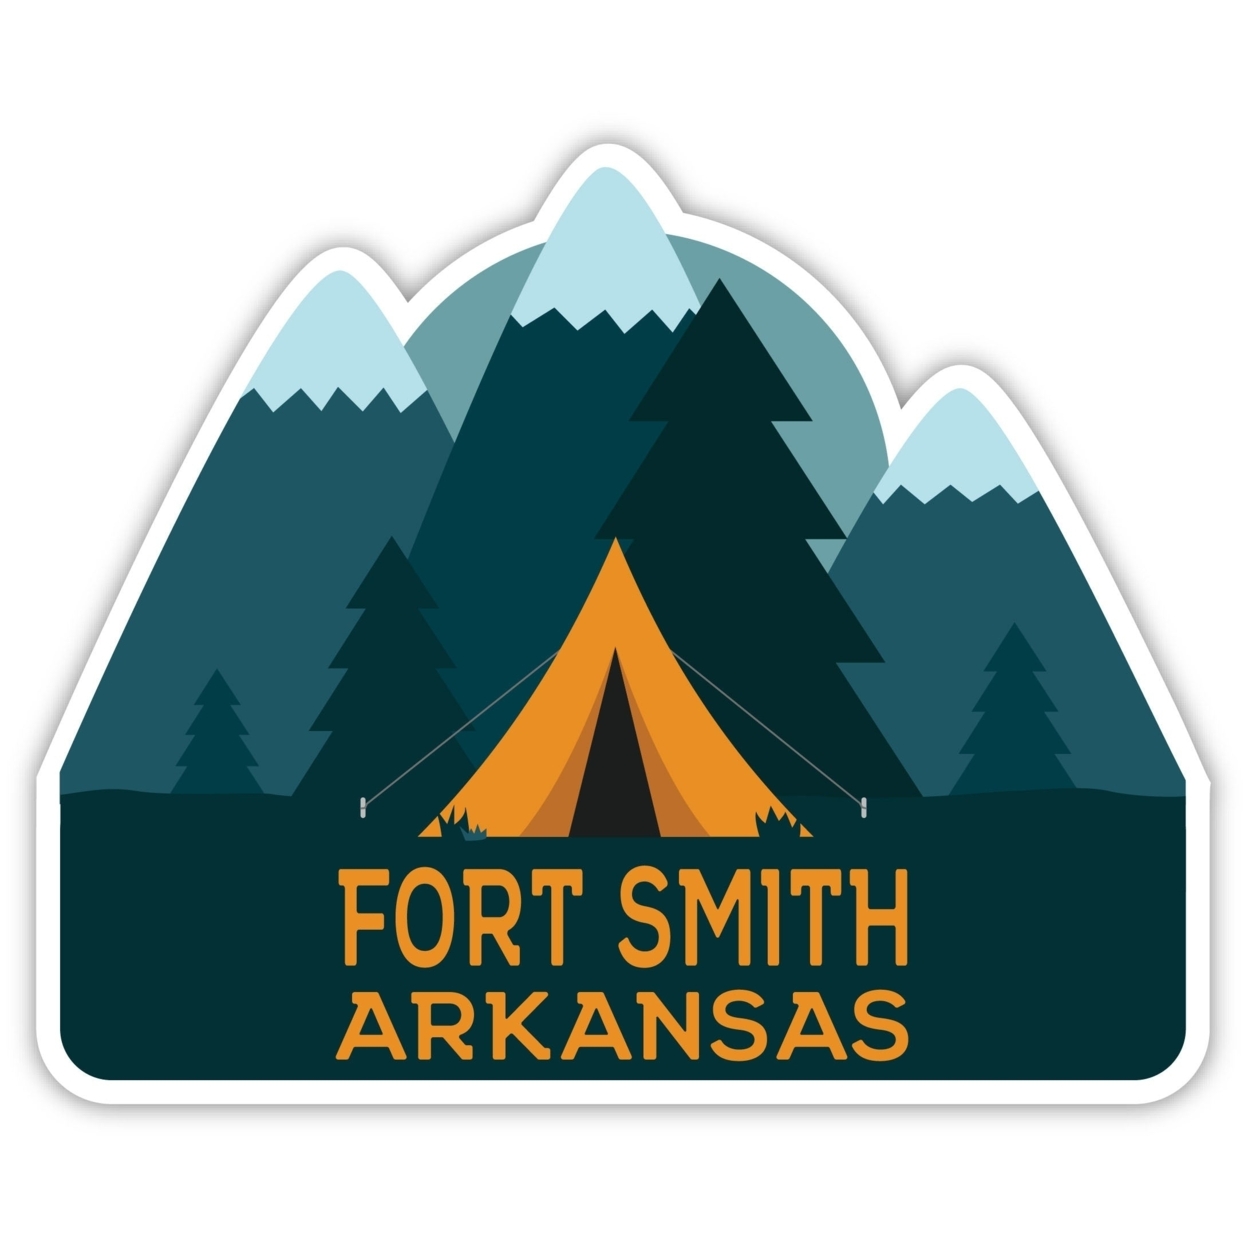 Fort Smith Arkansas Souvenir Decorative Stickers (Choose Theme And Size) - 4-Pack, 6-Inch, Tent